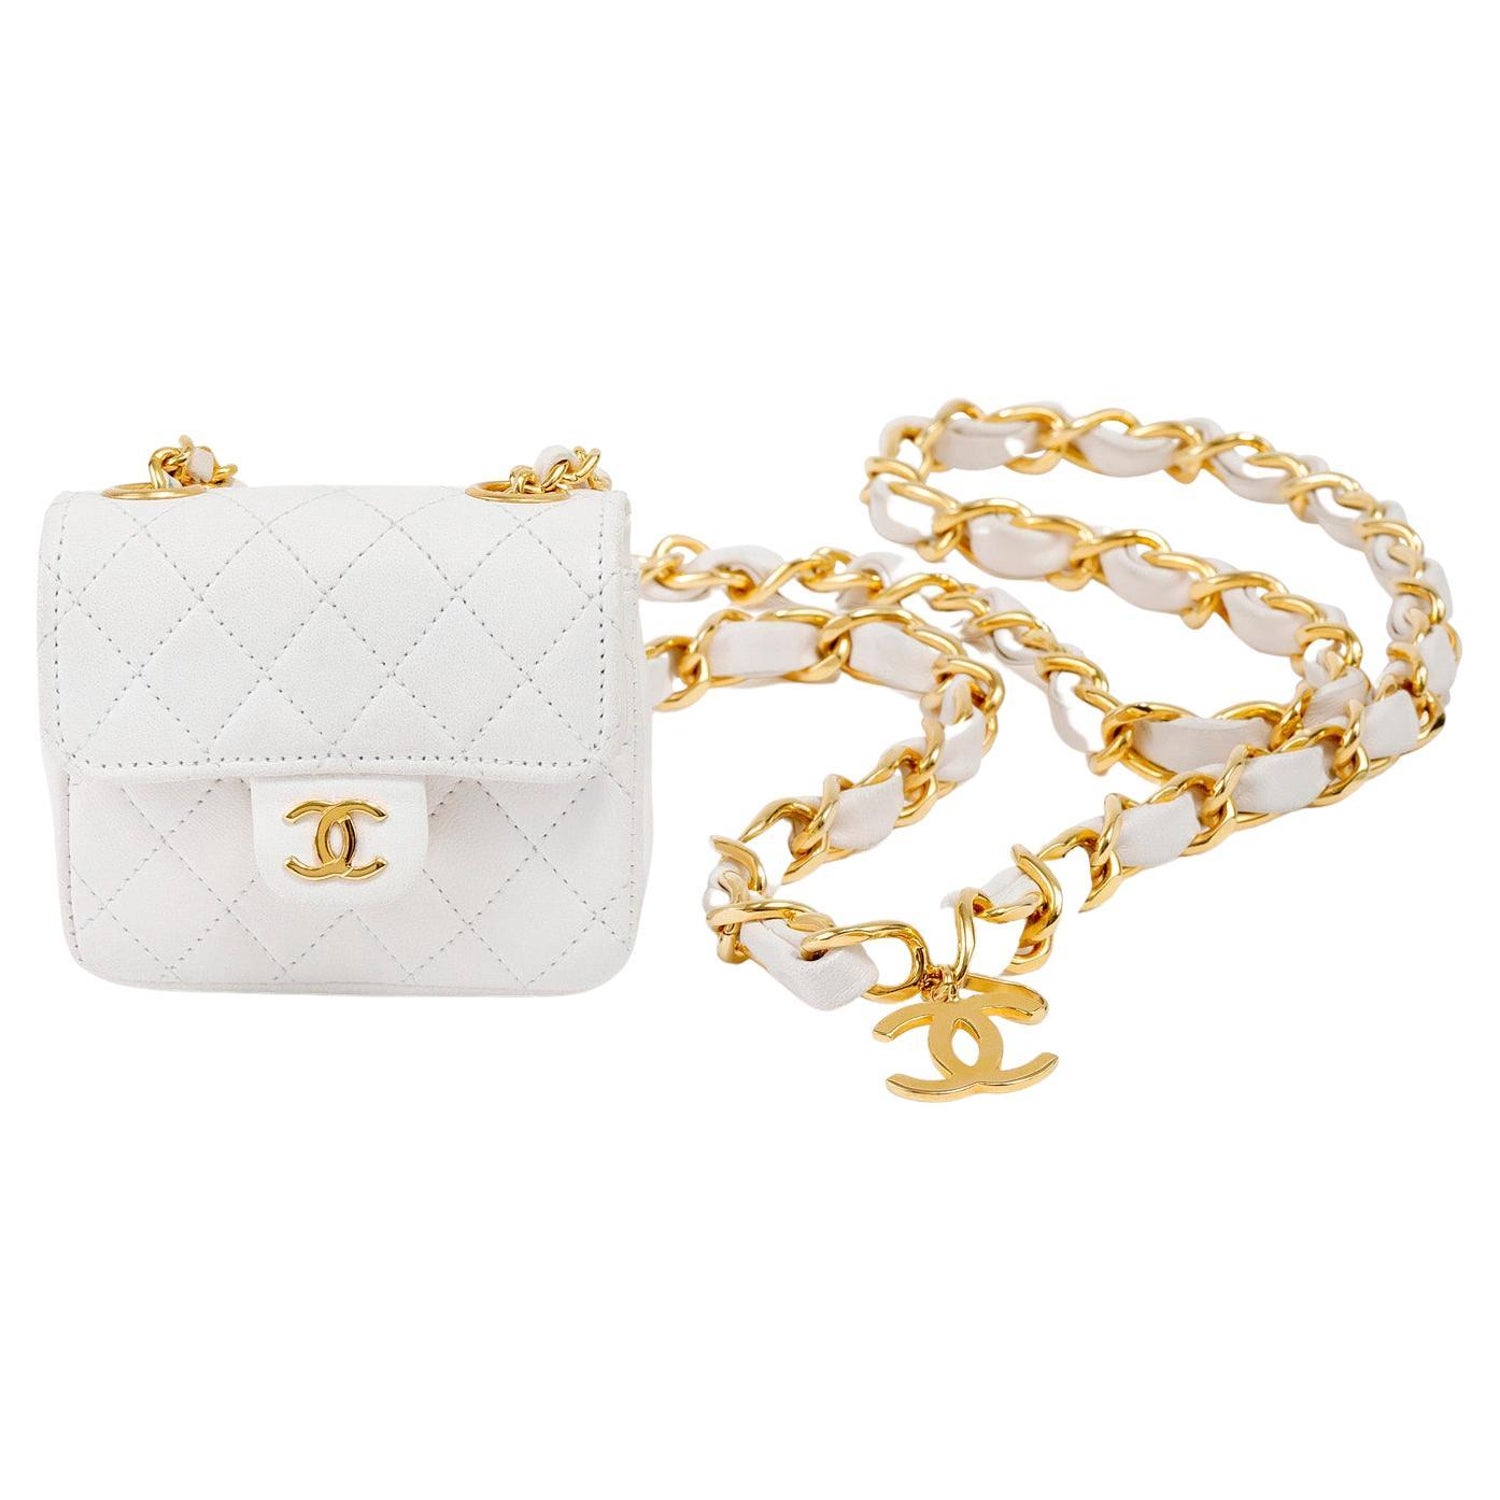 Chanel Light Beige Cream Quilted Leather Micro Flap Charm Bag